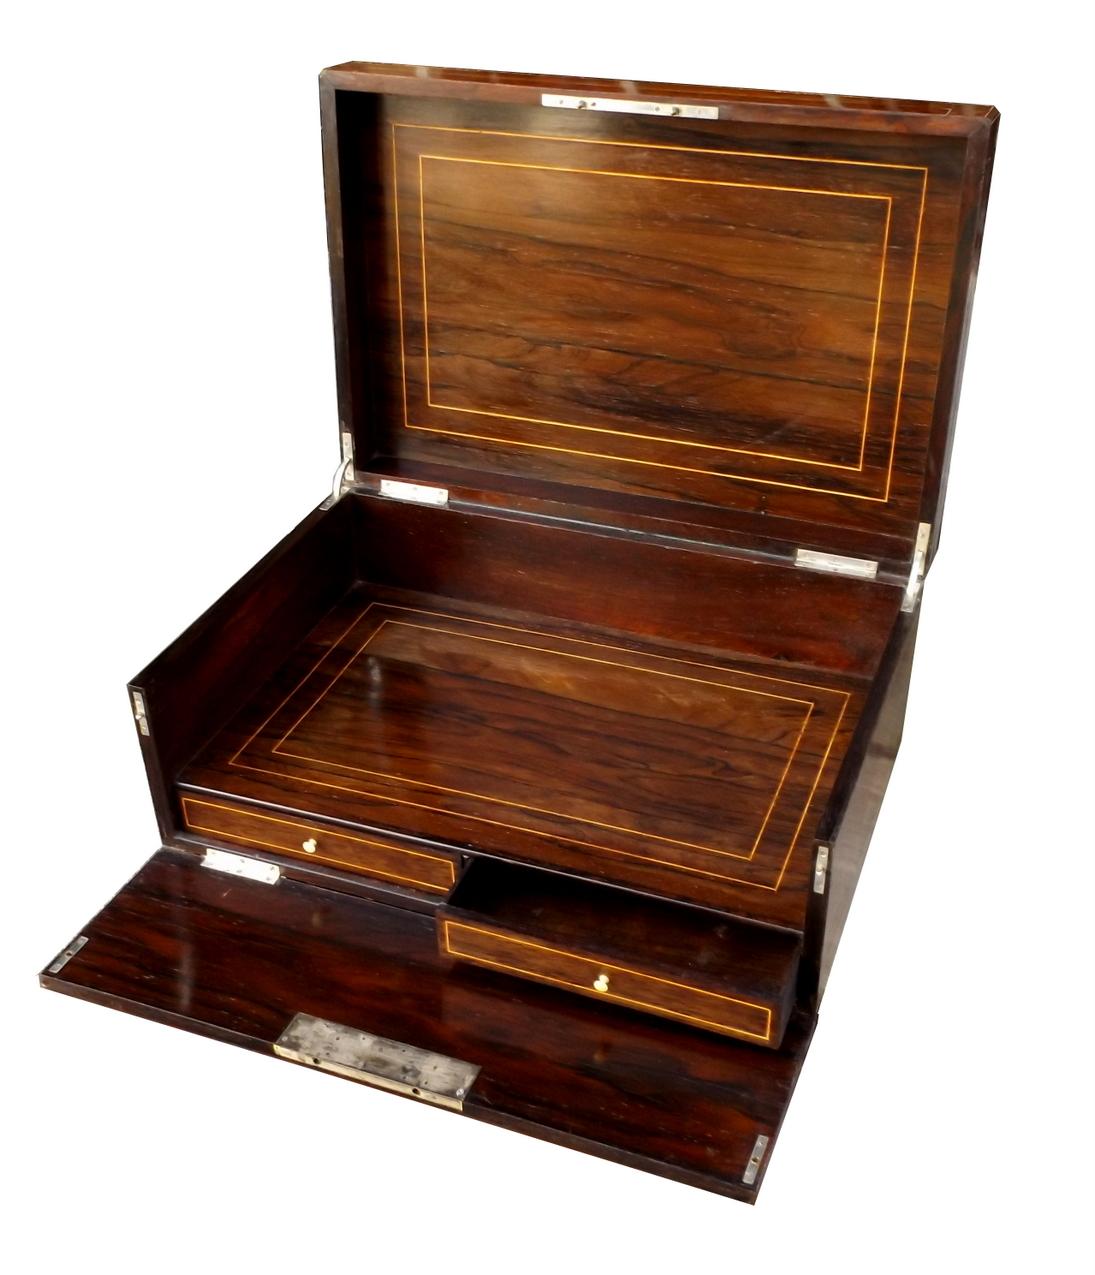 A very elegant large French well figured mahogany inlaid with Brass stringing Casket of very generous proportions and of outstanding Museum quality, firmly attributed to Alphonse Tahan Paris (1830-1880), official master cabinetmaker to Napoleon III.